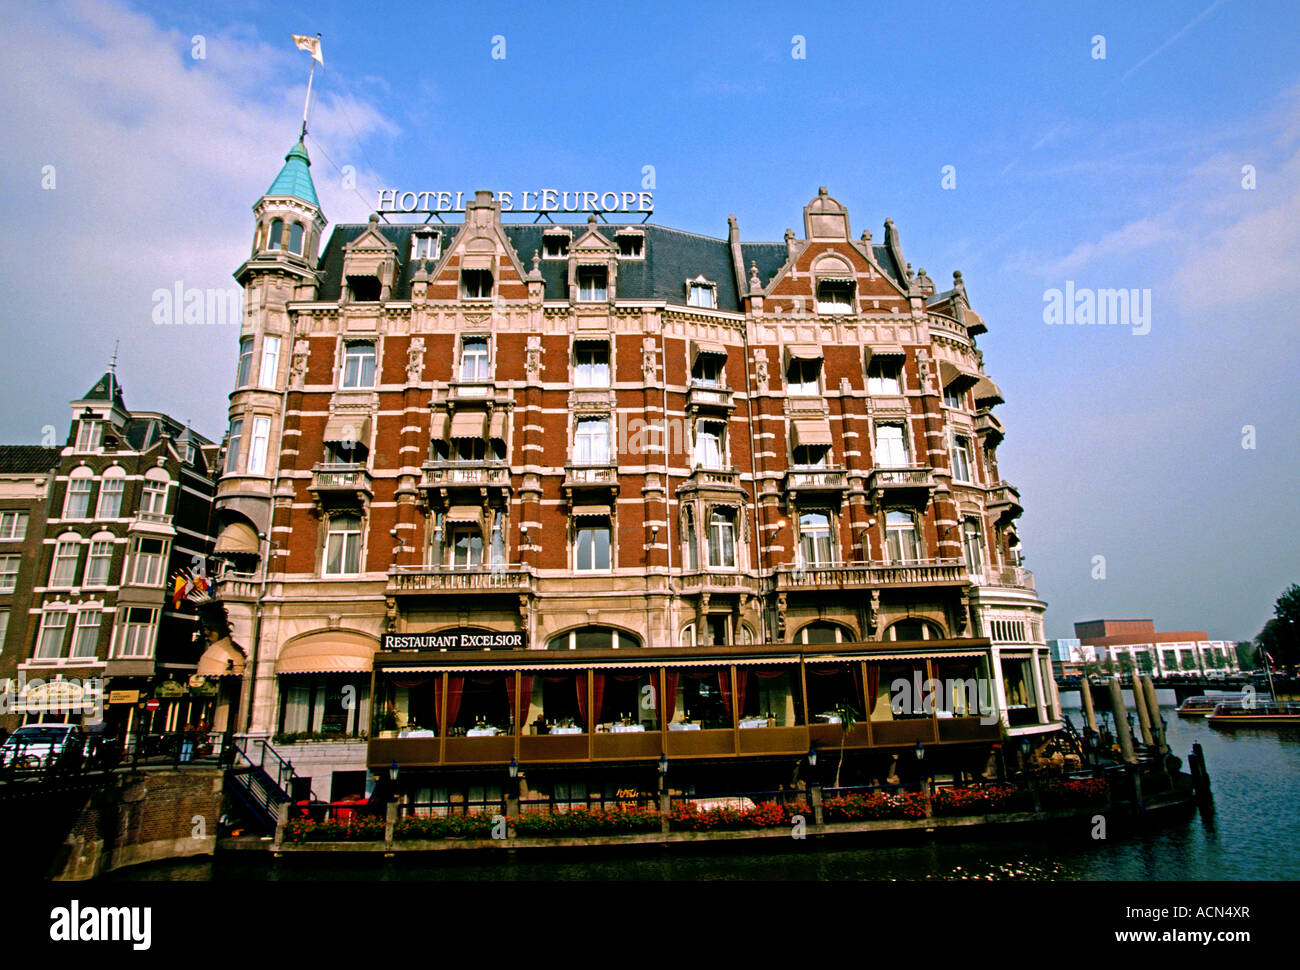 waterfront, guest rooms, rooms and lodging, rooms, lodging, accommodations, facade, hotel, Hotel de L'Europe, Amsterdam, Holland, Netherlands, Europe Stock Photo